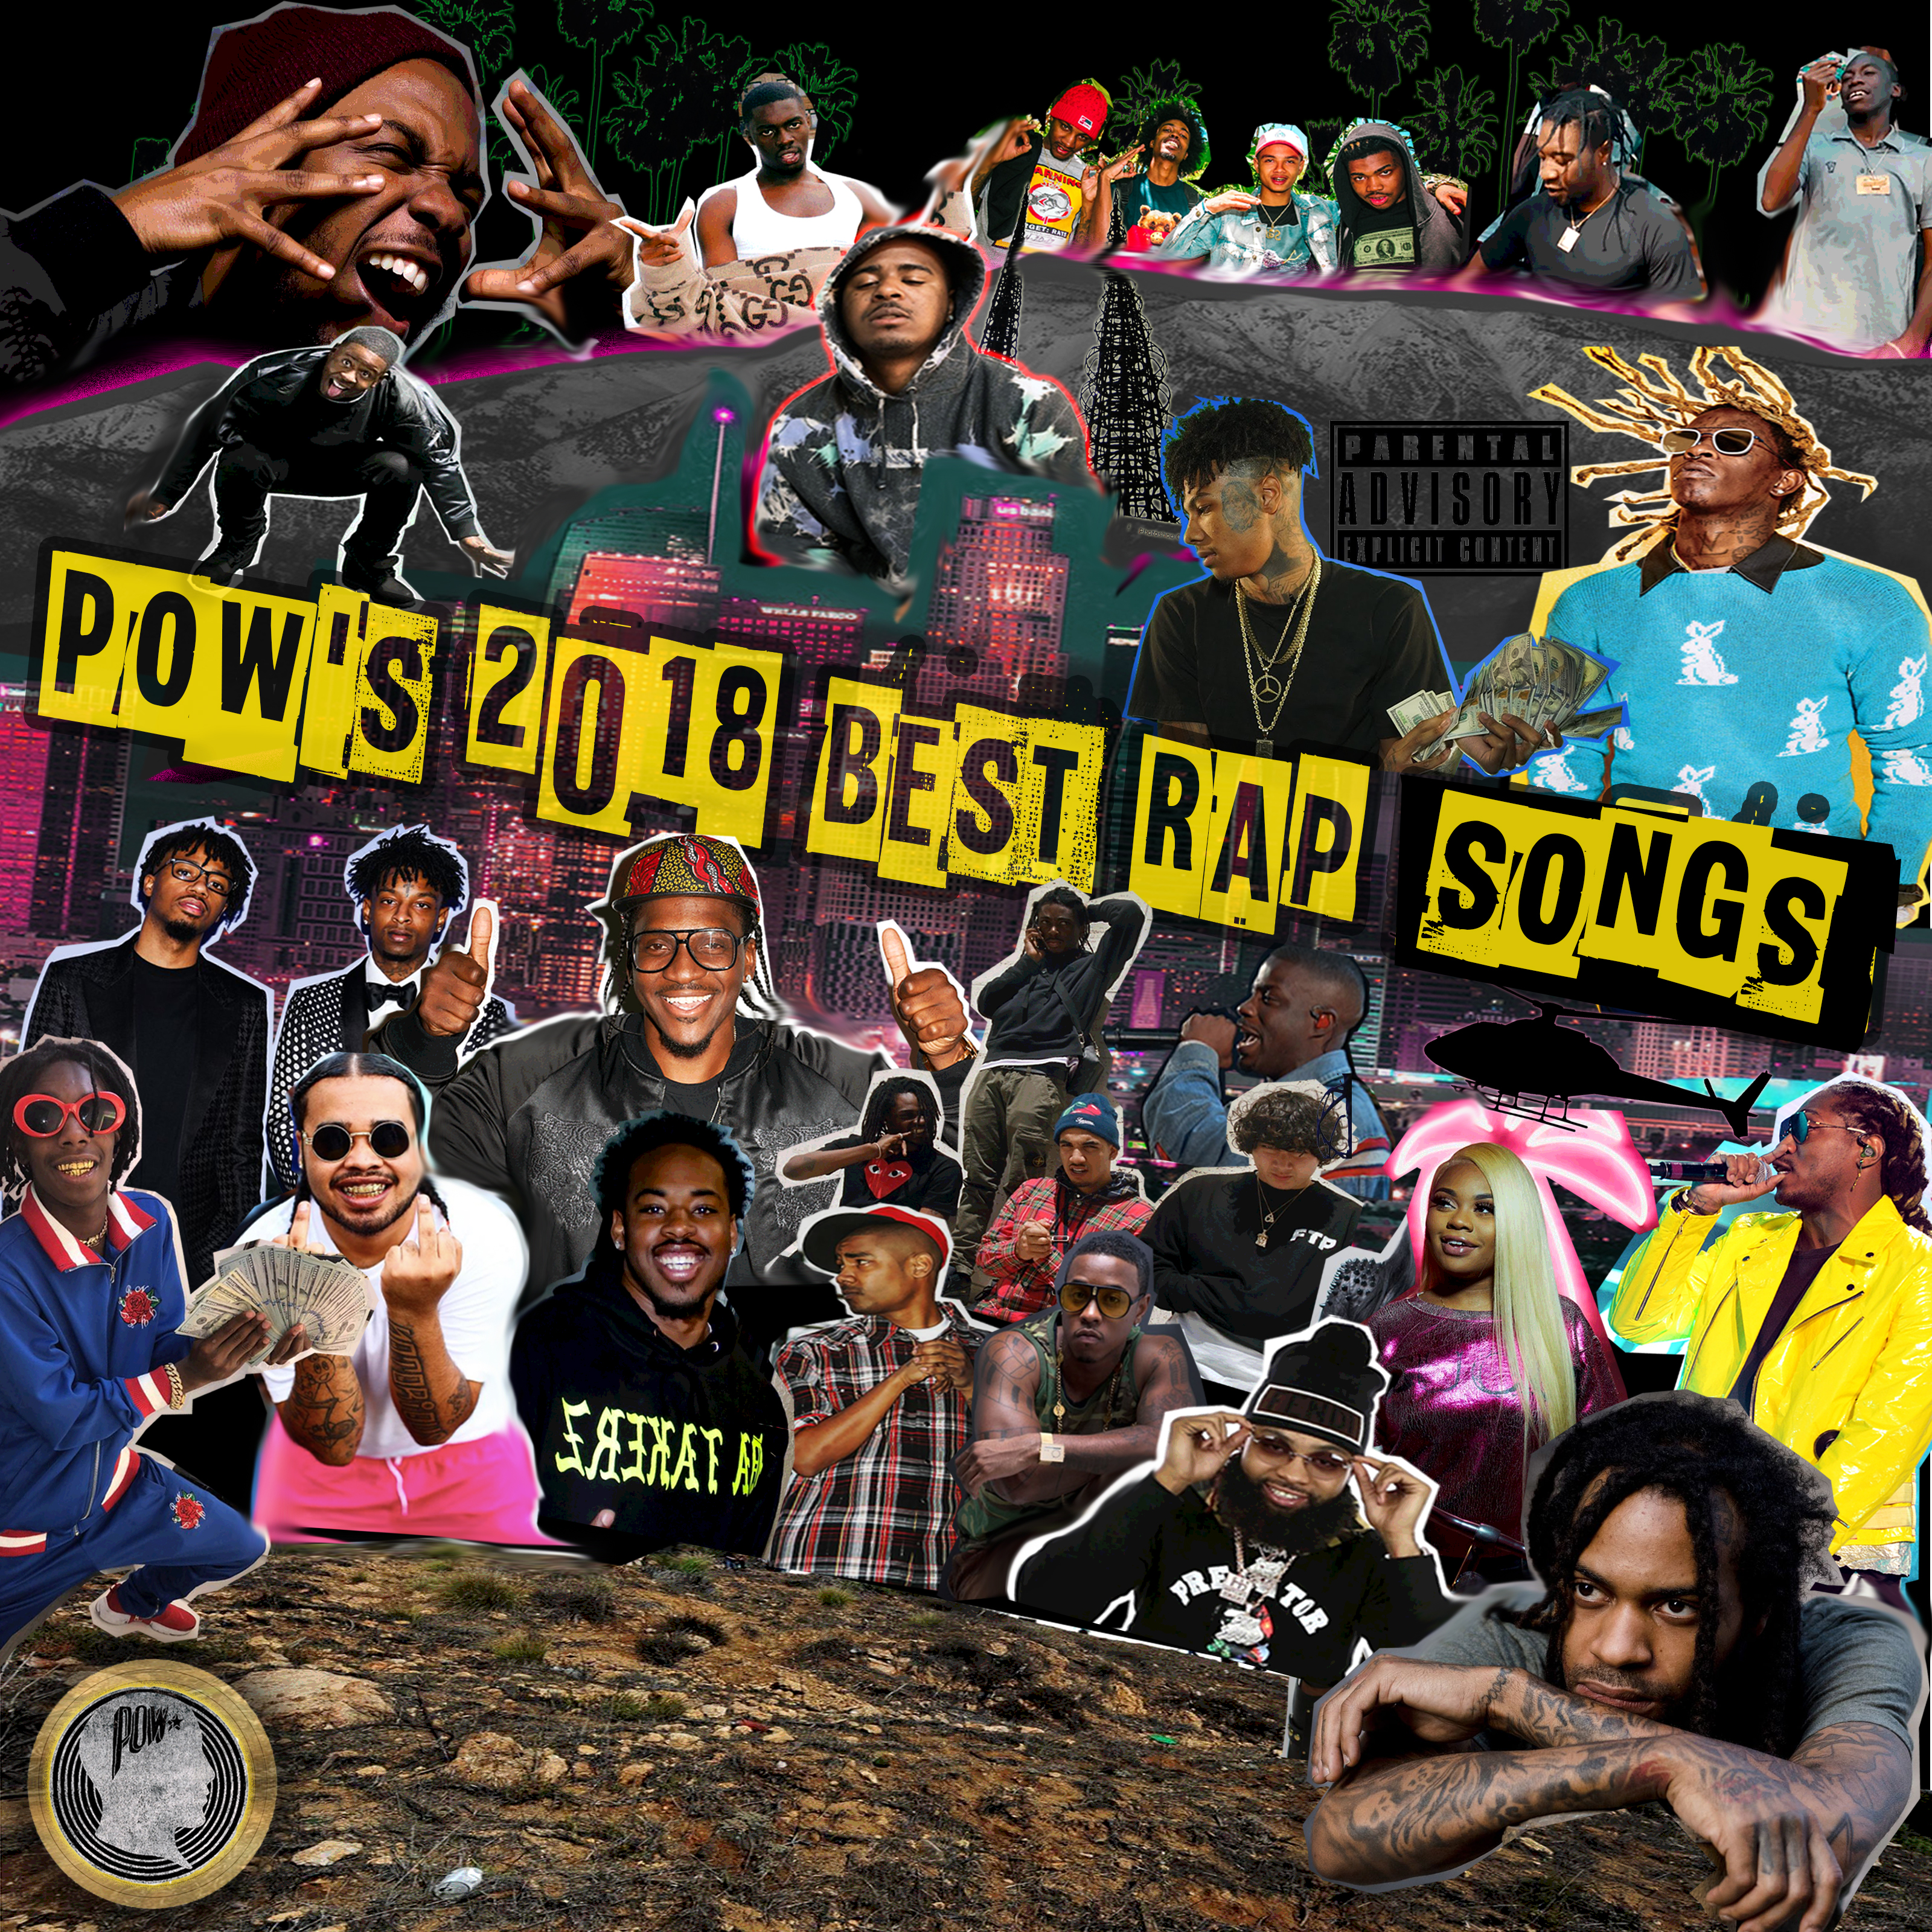 Bang Van Galleries Orgy - The POW Best Rap Songs of 2018 | Passion of the Weiss